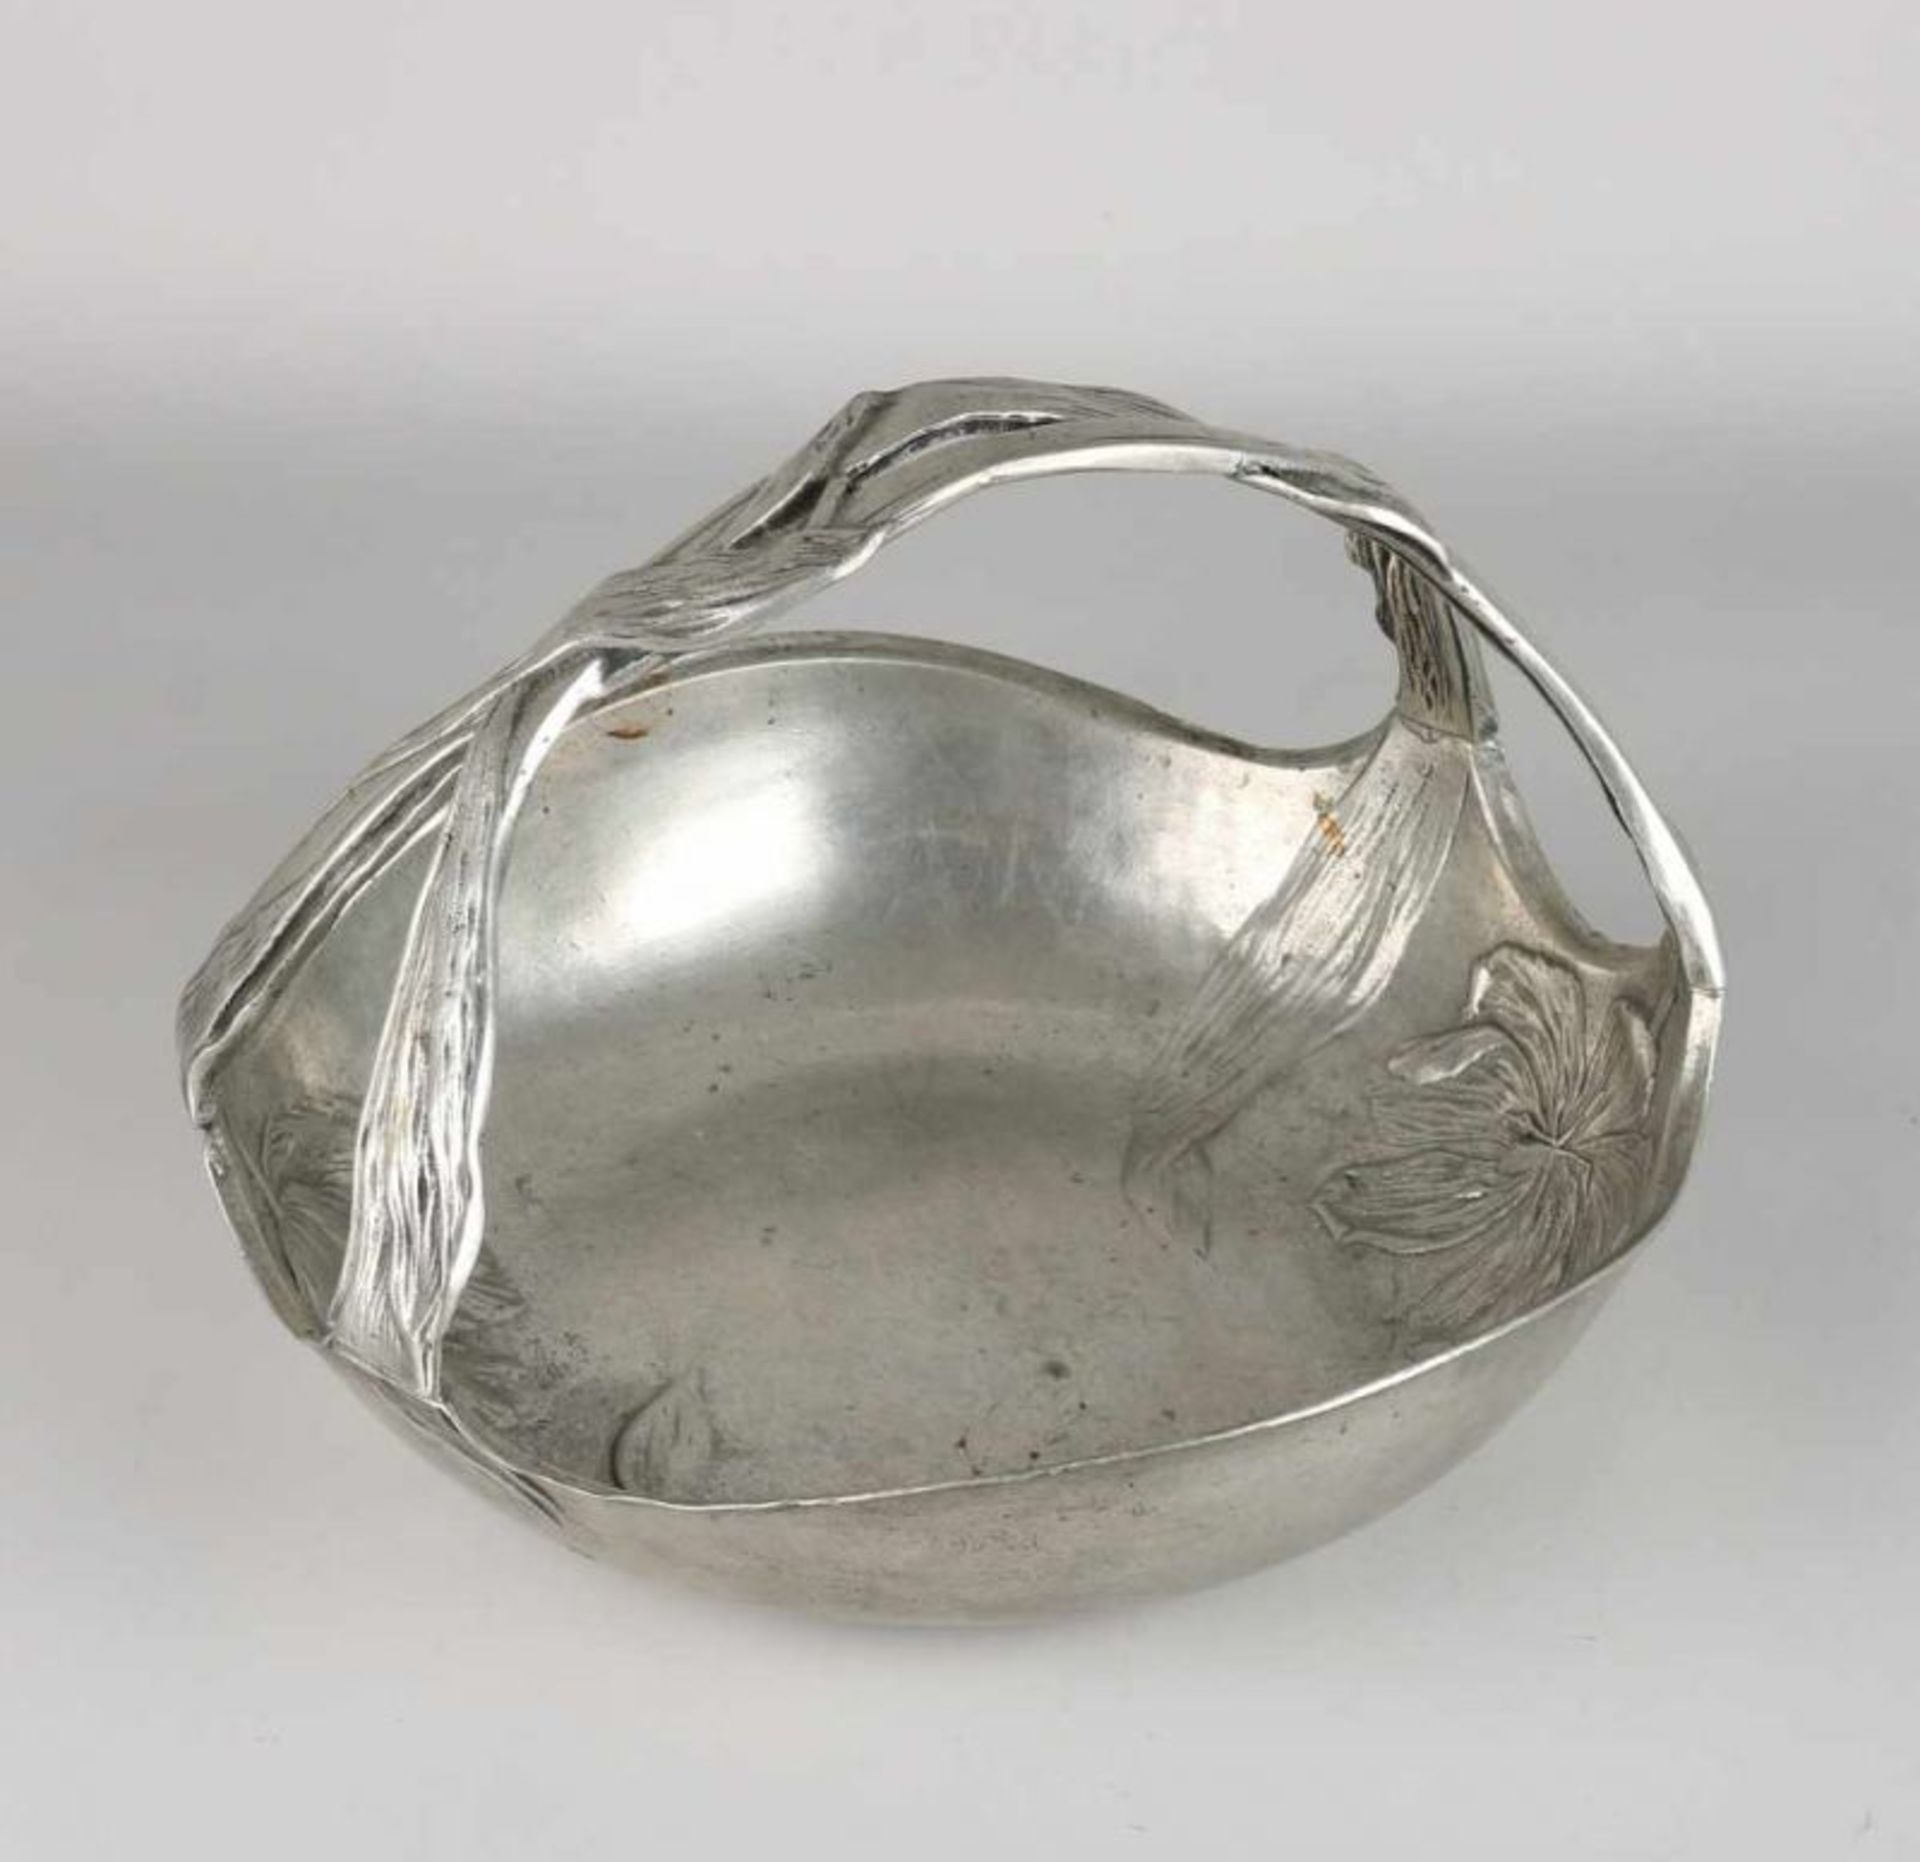 Heavy antique pewter Jugendstil scale. Circa 1915. Signature Kurz & Co. Holland. With floral /